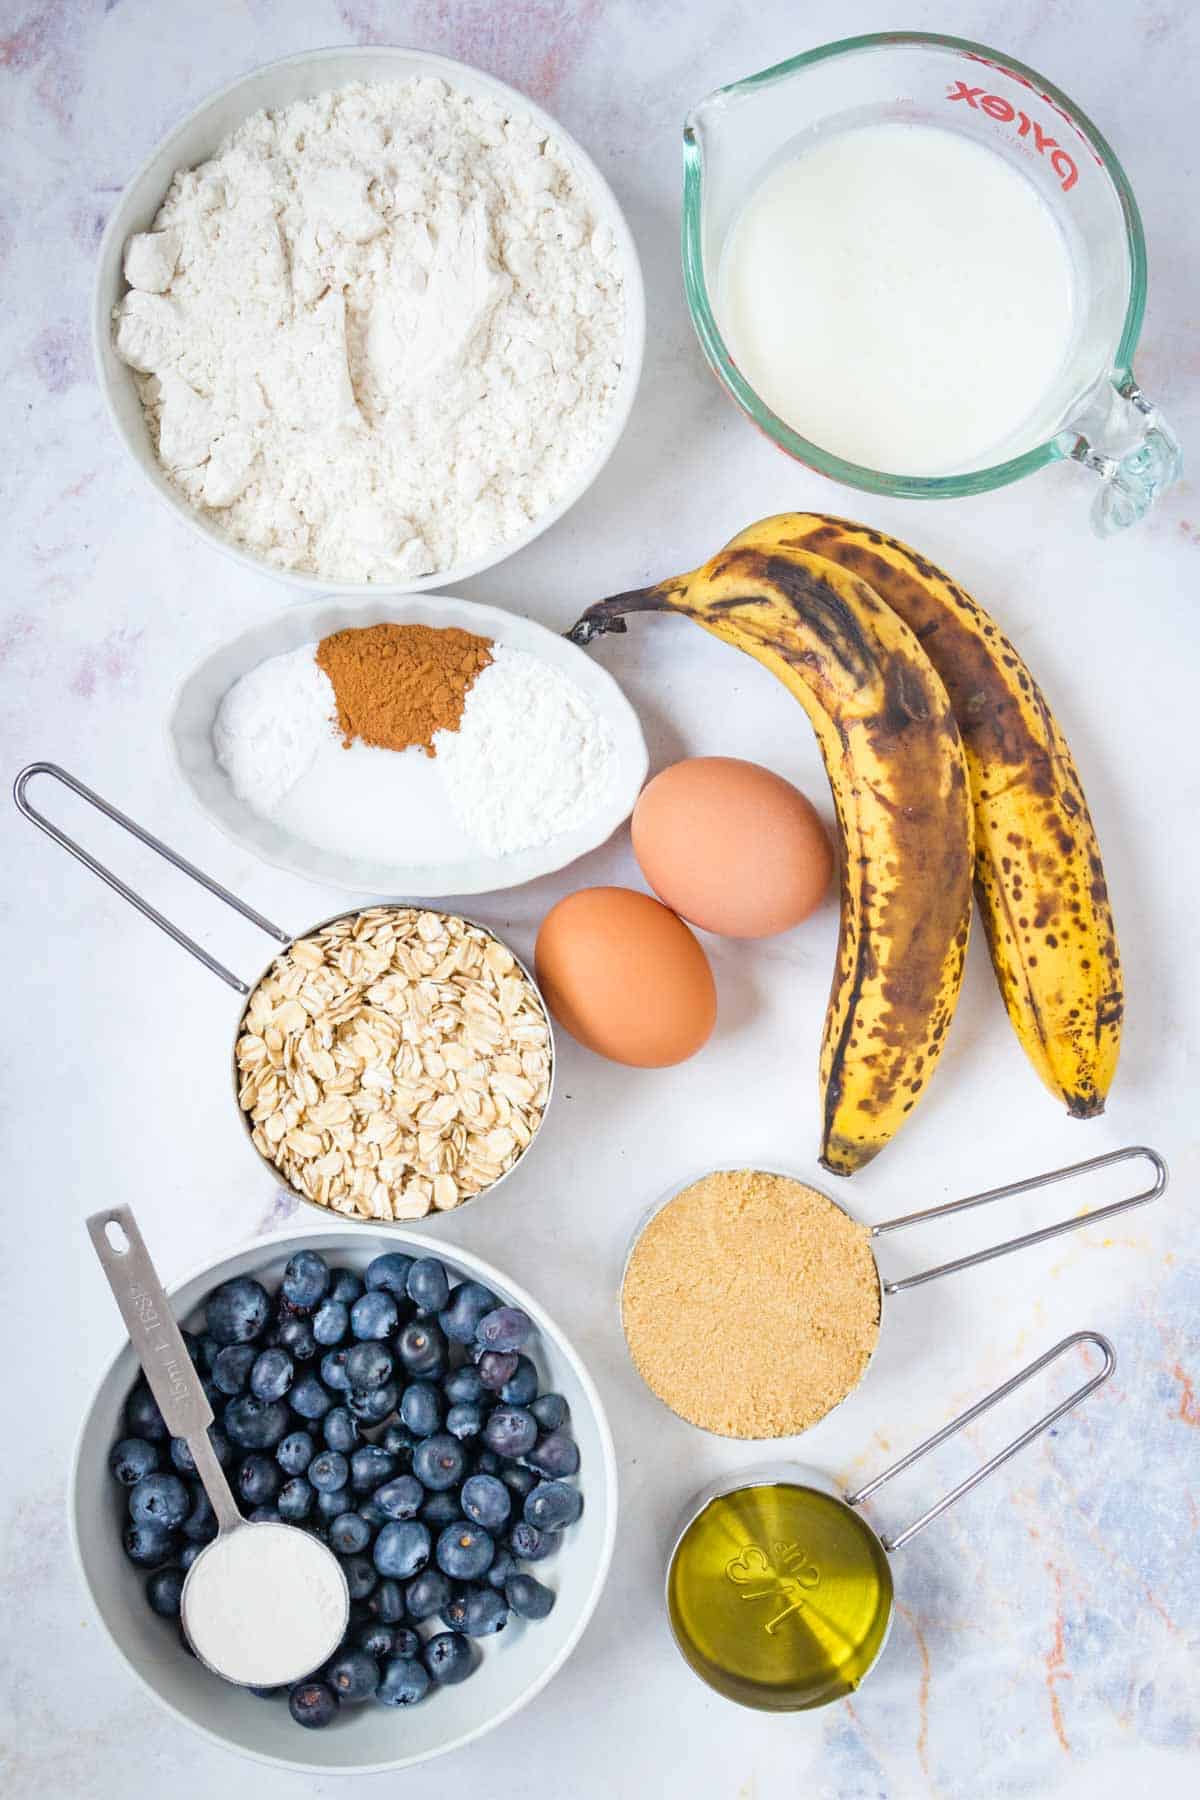 Ripe bananas, gluten-free flour, blueberries and the rest of the muffin ingredients on a countertop